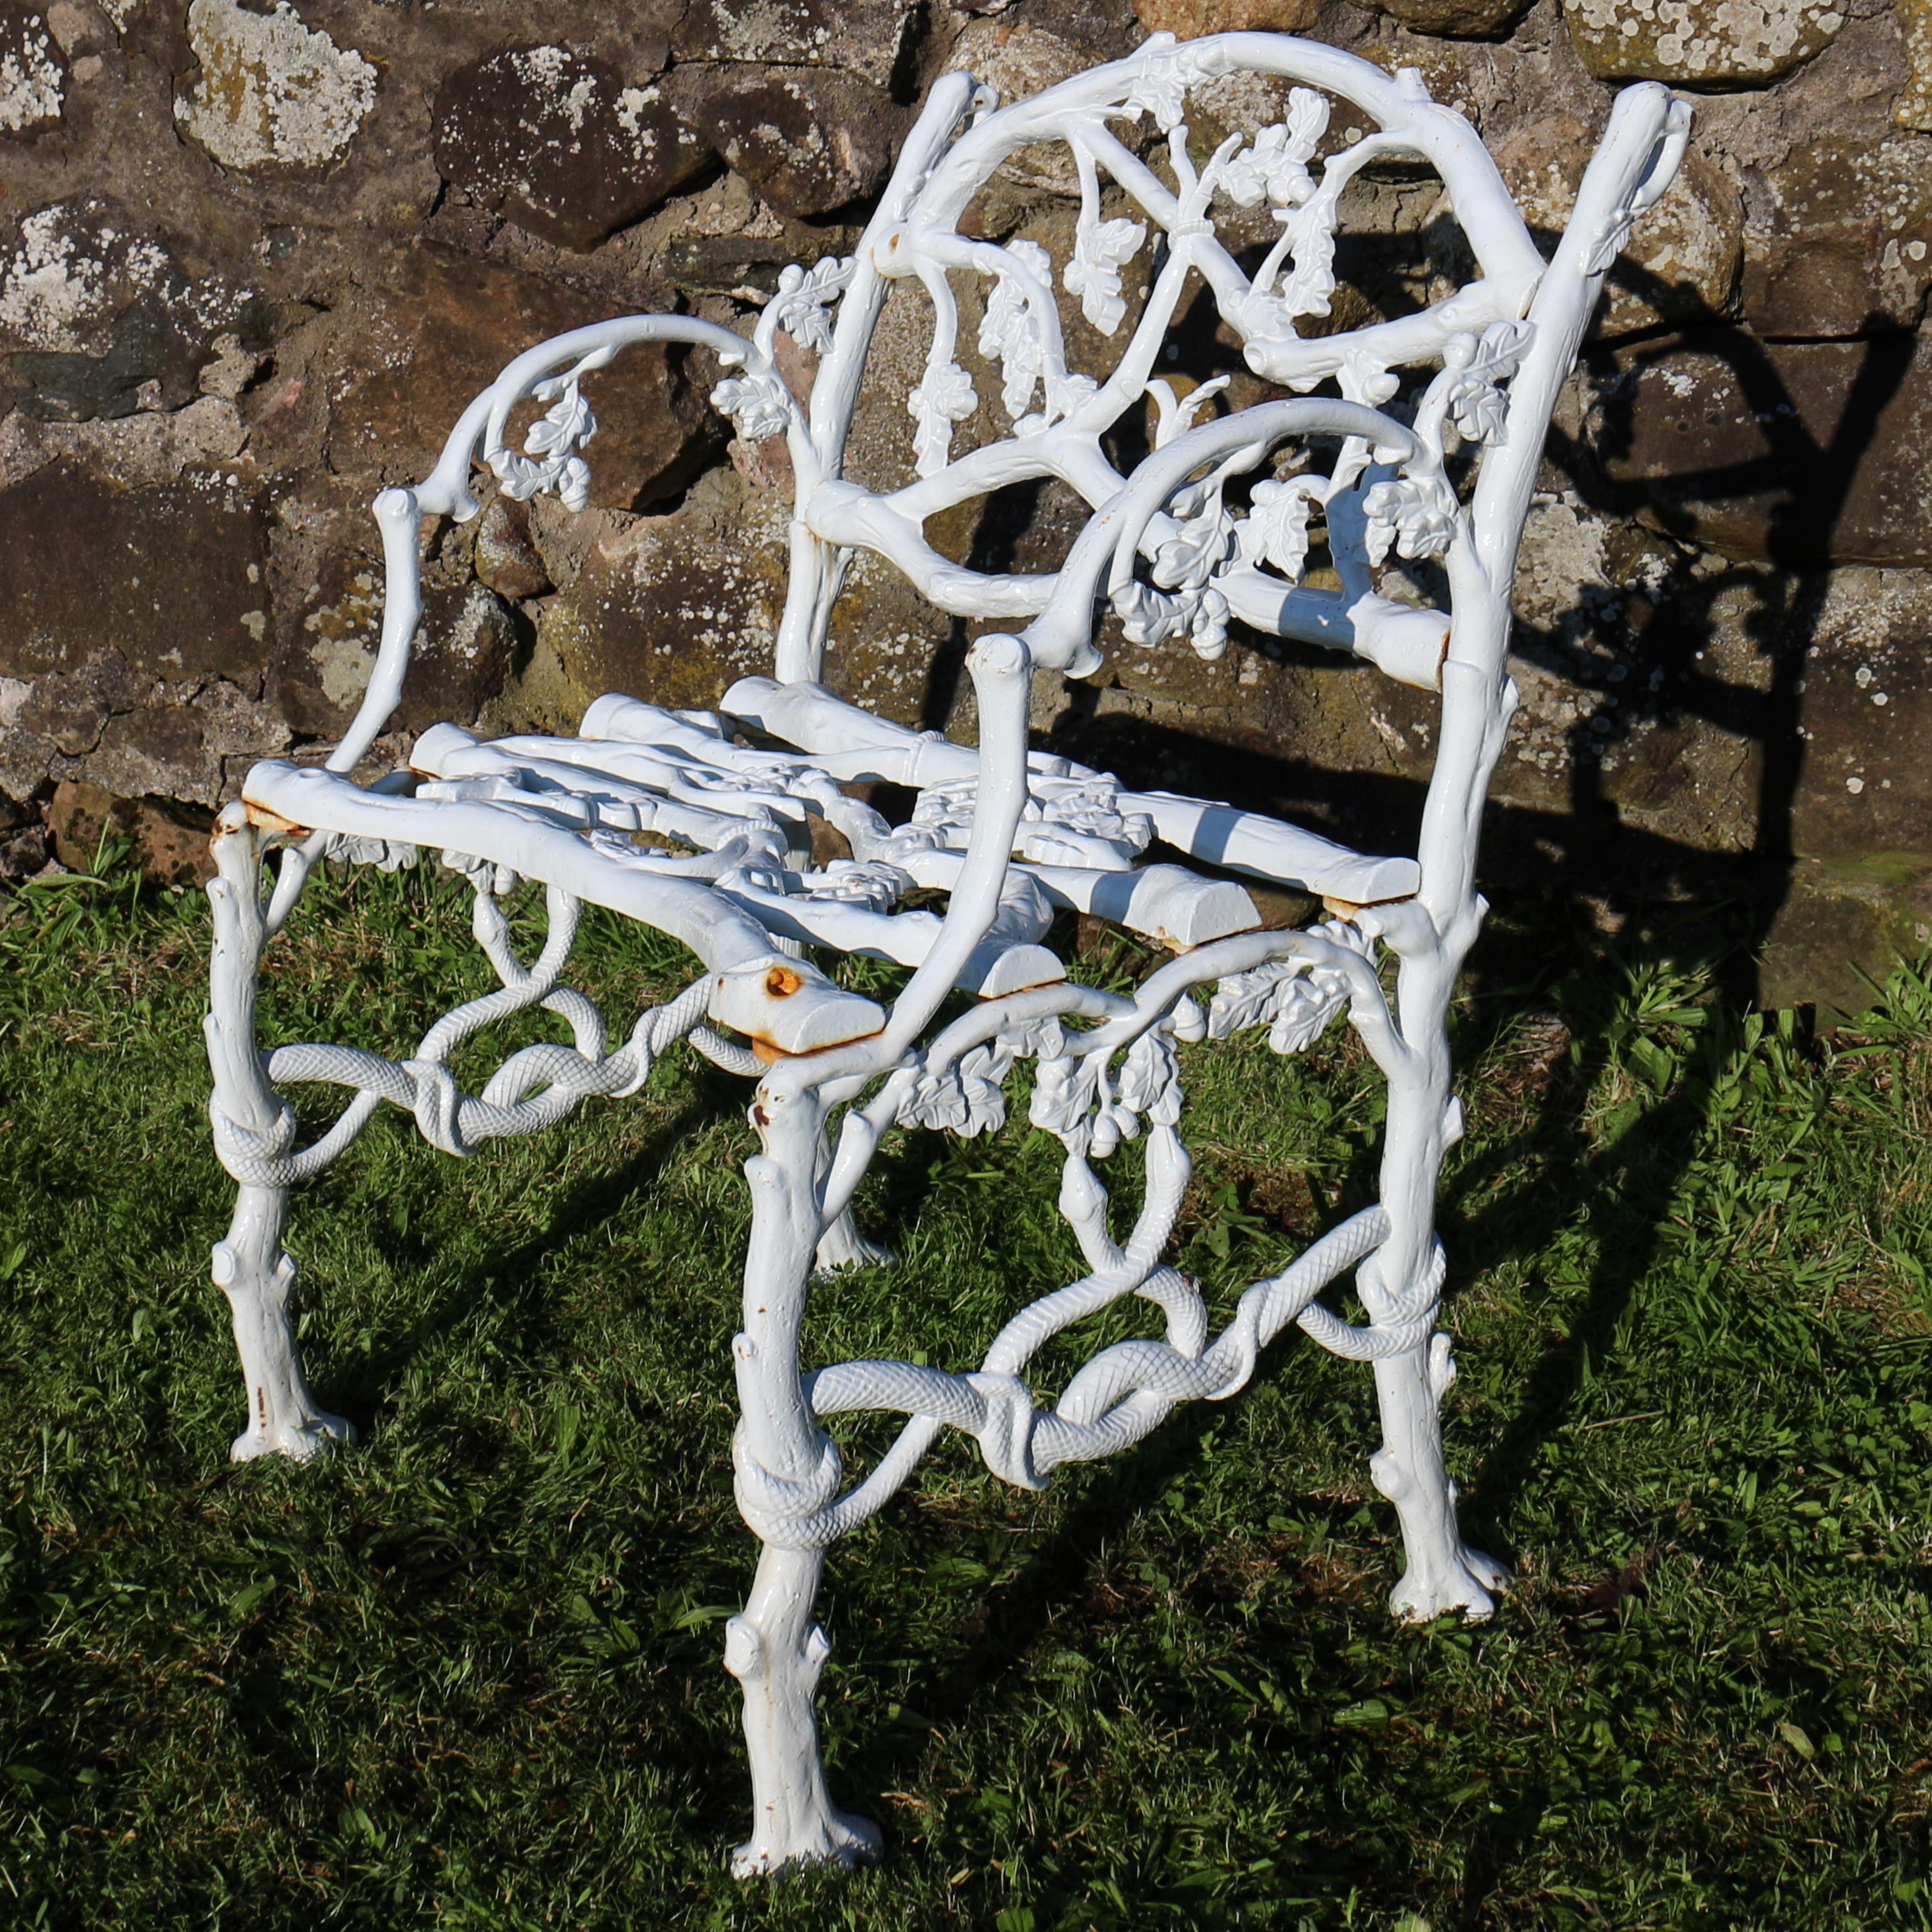 A Victorian cast iron garden seat in the serpent and twig pattern and dating to circa 1860. This beautiful rustic naturalistic casting is based on the English oak tree and depict branches adorned with oak leaves, acorns and intertwined serpents. The